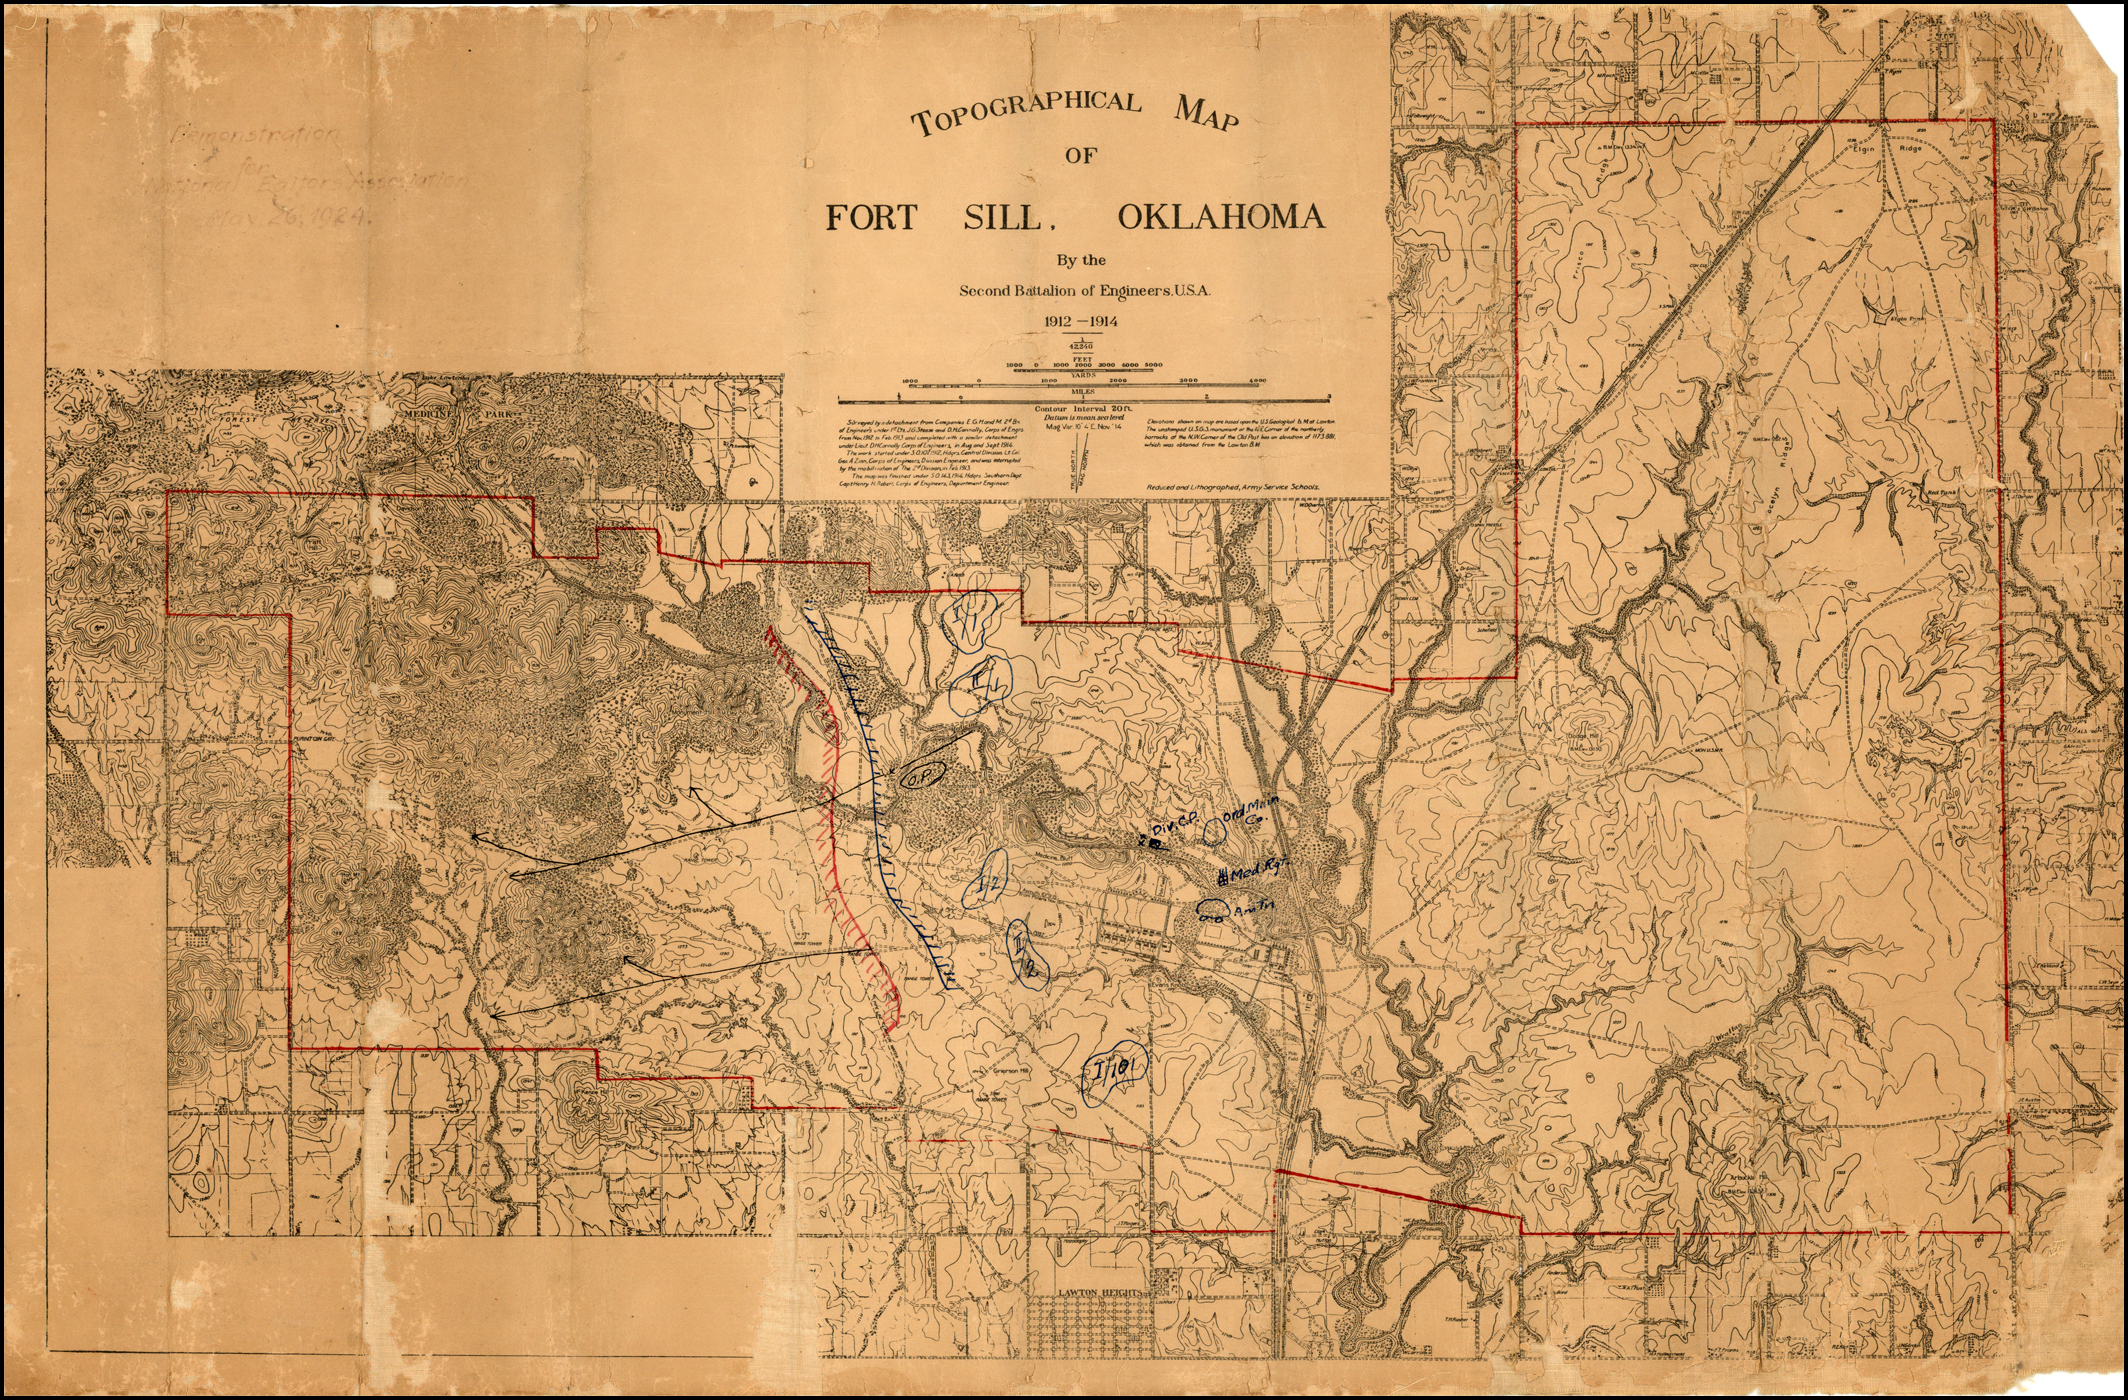 Fort Sill Oklahoma Map Topographical Map Of Fort Sill, Oklahoma By The Second Battalion Of  Engineers, Usa 1912-1914 - Barry Lawrence Ruderman Antique Maps Inc.